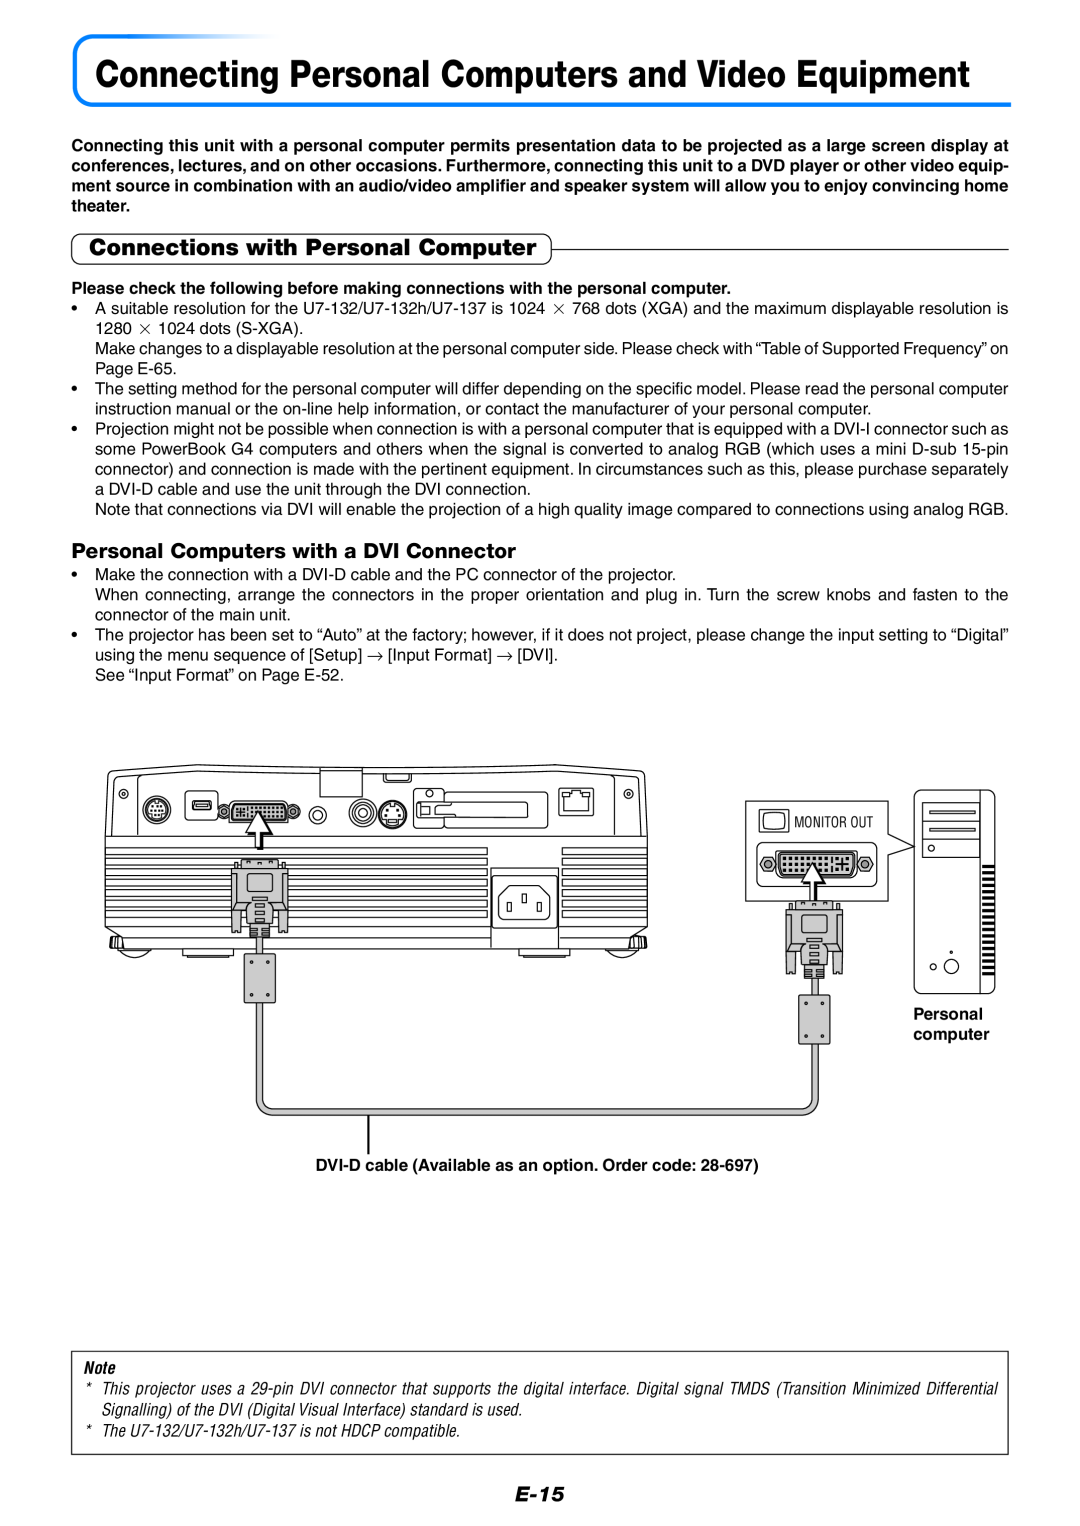 PLUS Vision U7-132h, U7-137 user manual Connections with Personal Computer, Personal Computers with a DVI Connector, E-15 